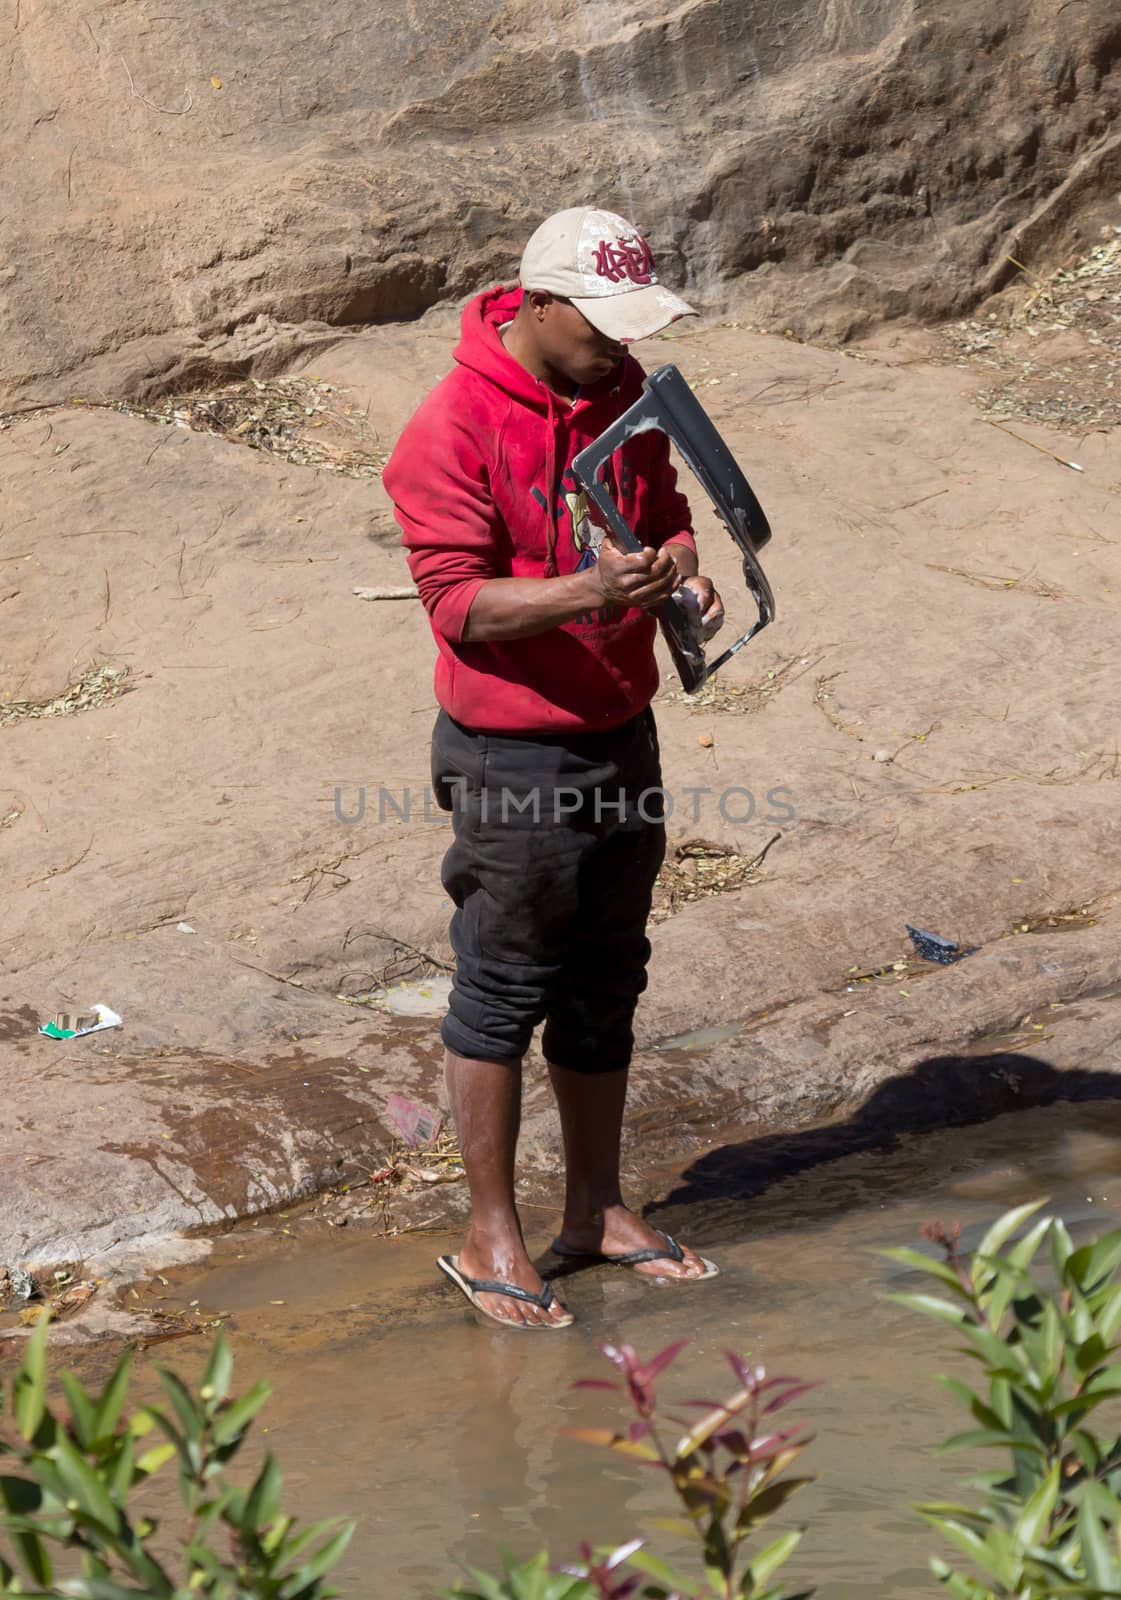 Madagascar on july 26, 2019 - Man washing carparts by hand, getting them ready to sell